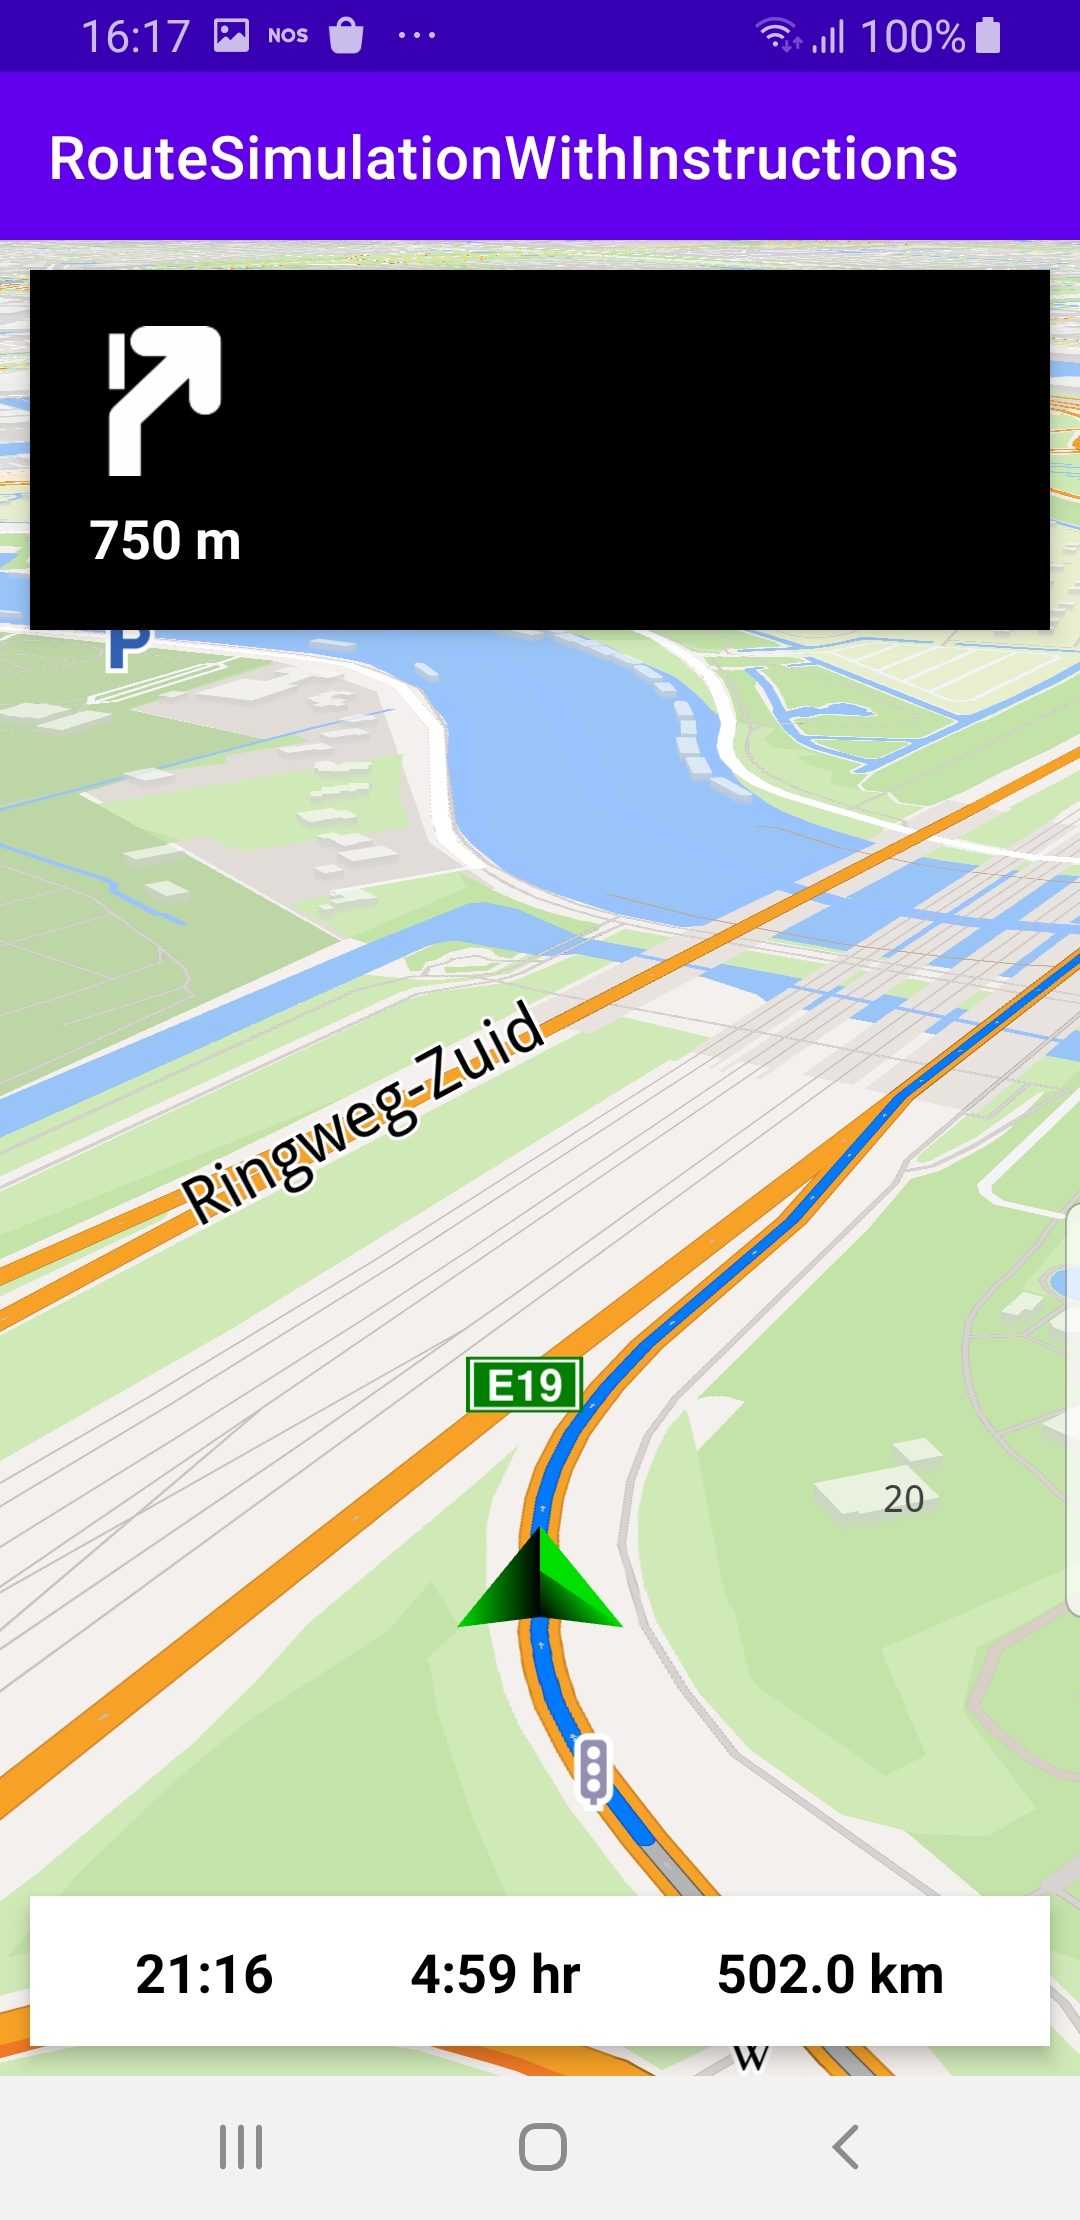 Route simulation with instructions example Android screenshot